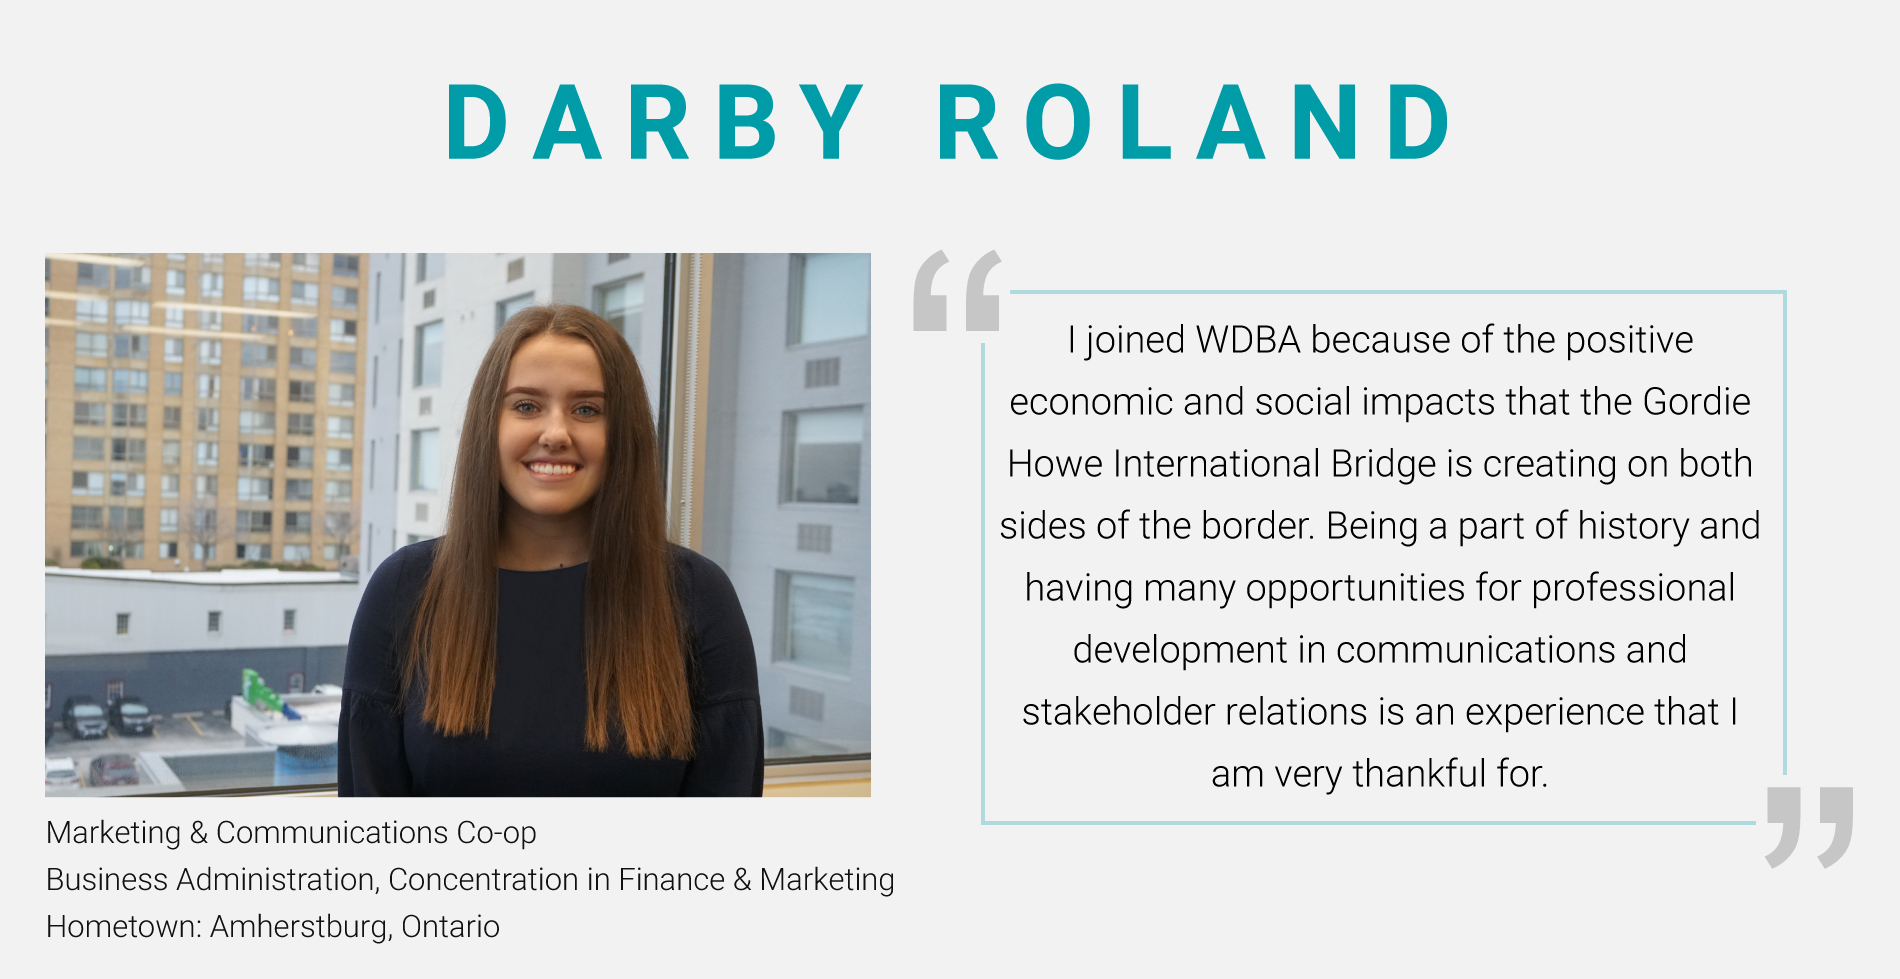 Photo of Darby Roland, Marketing & Communications Co-Op with a quote: "I joined WDBA because of the positive economic and social impacts that the Gordie Howe International Bridge is creating on both sides of the border. Being a part of history and having many opportunities for professional development in communications and stakeholder relations is an experience that I am very thankful for."